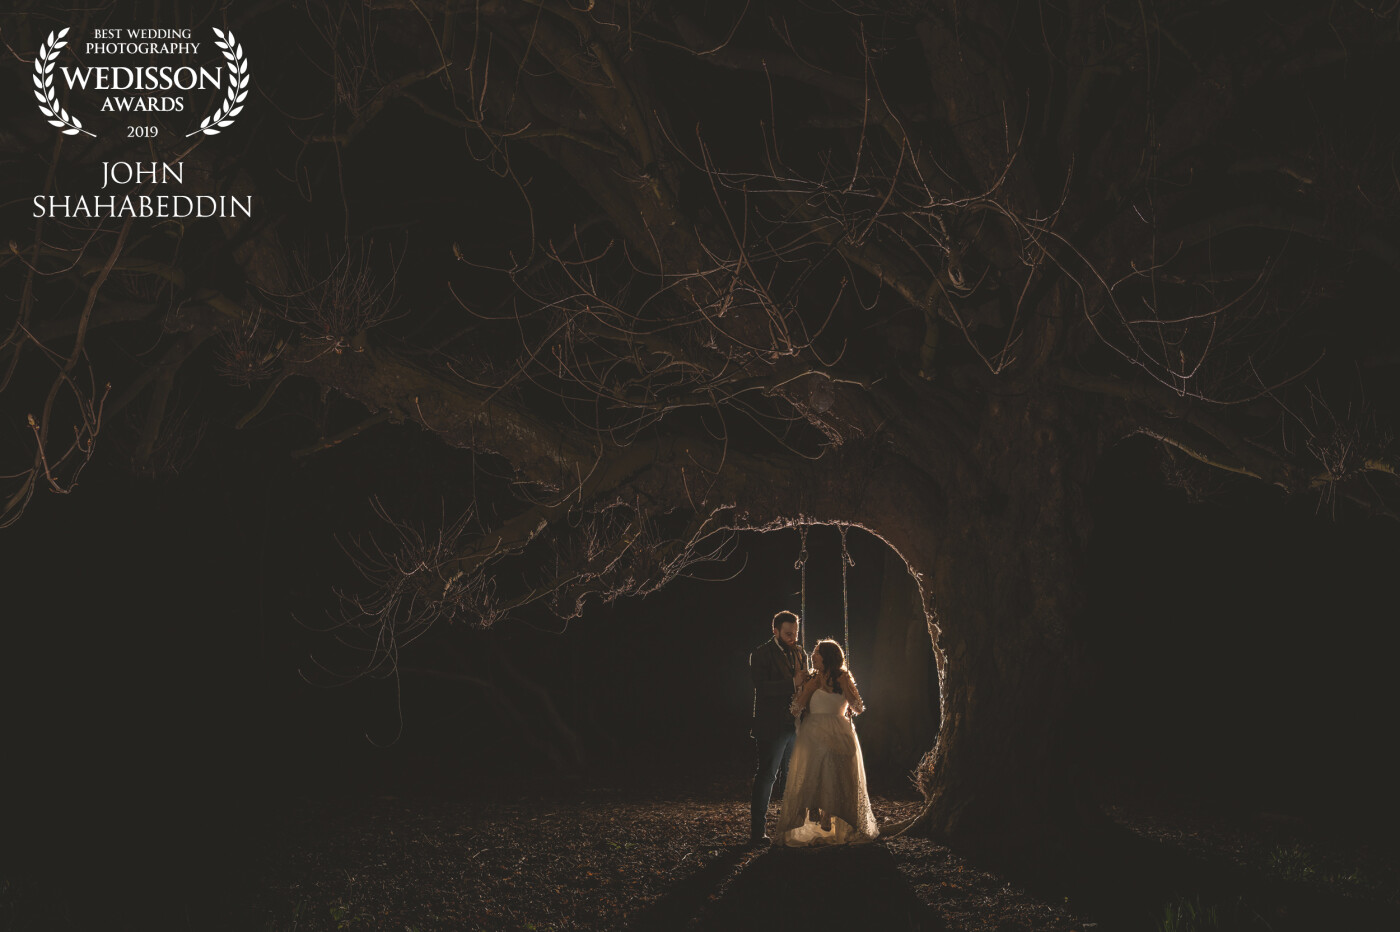 Whilst out during the day exploring the woodland at Shotton Grange, a small North East country house wedding venue, the couple and I came across a beautiful ancient chestnut tree with a lovely old rope swing, and I just knew we'd have to come back after dark to capture a stunning nighttime portrait. The image is lit with two speedlights, one behind the couple, and one off-frame to the left on low power to illuminate the canopy of the tree. This was by far my favorite shot of the whole wedding, full of drama and eerie beauty.